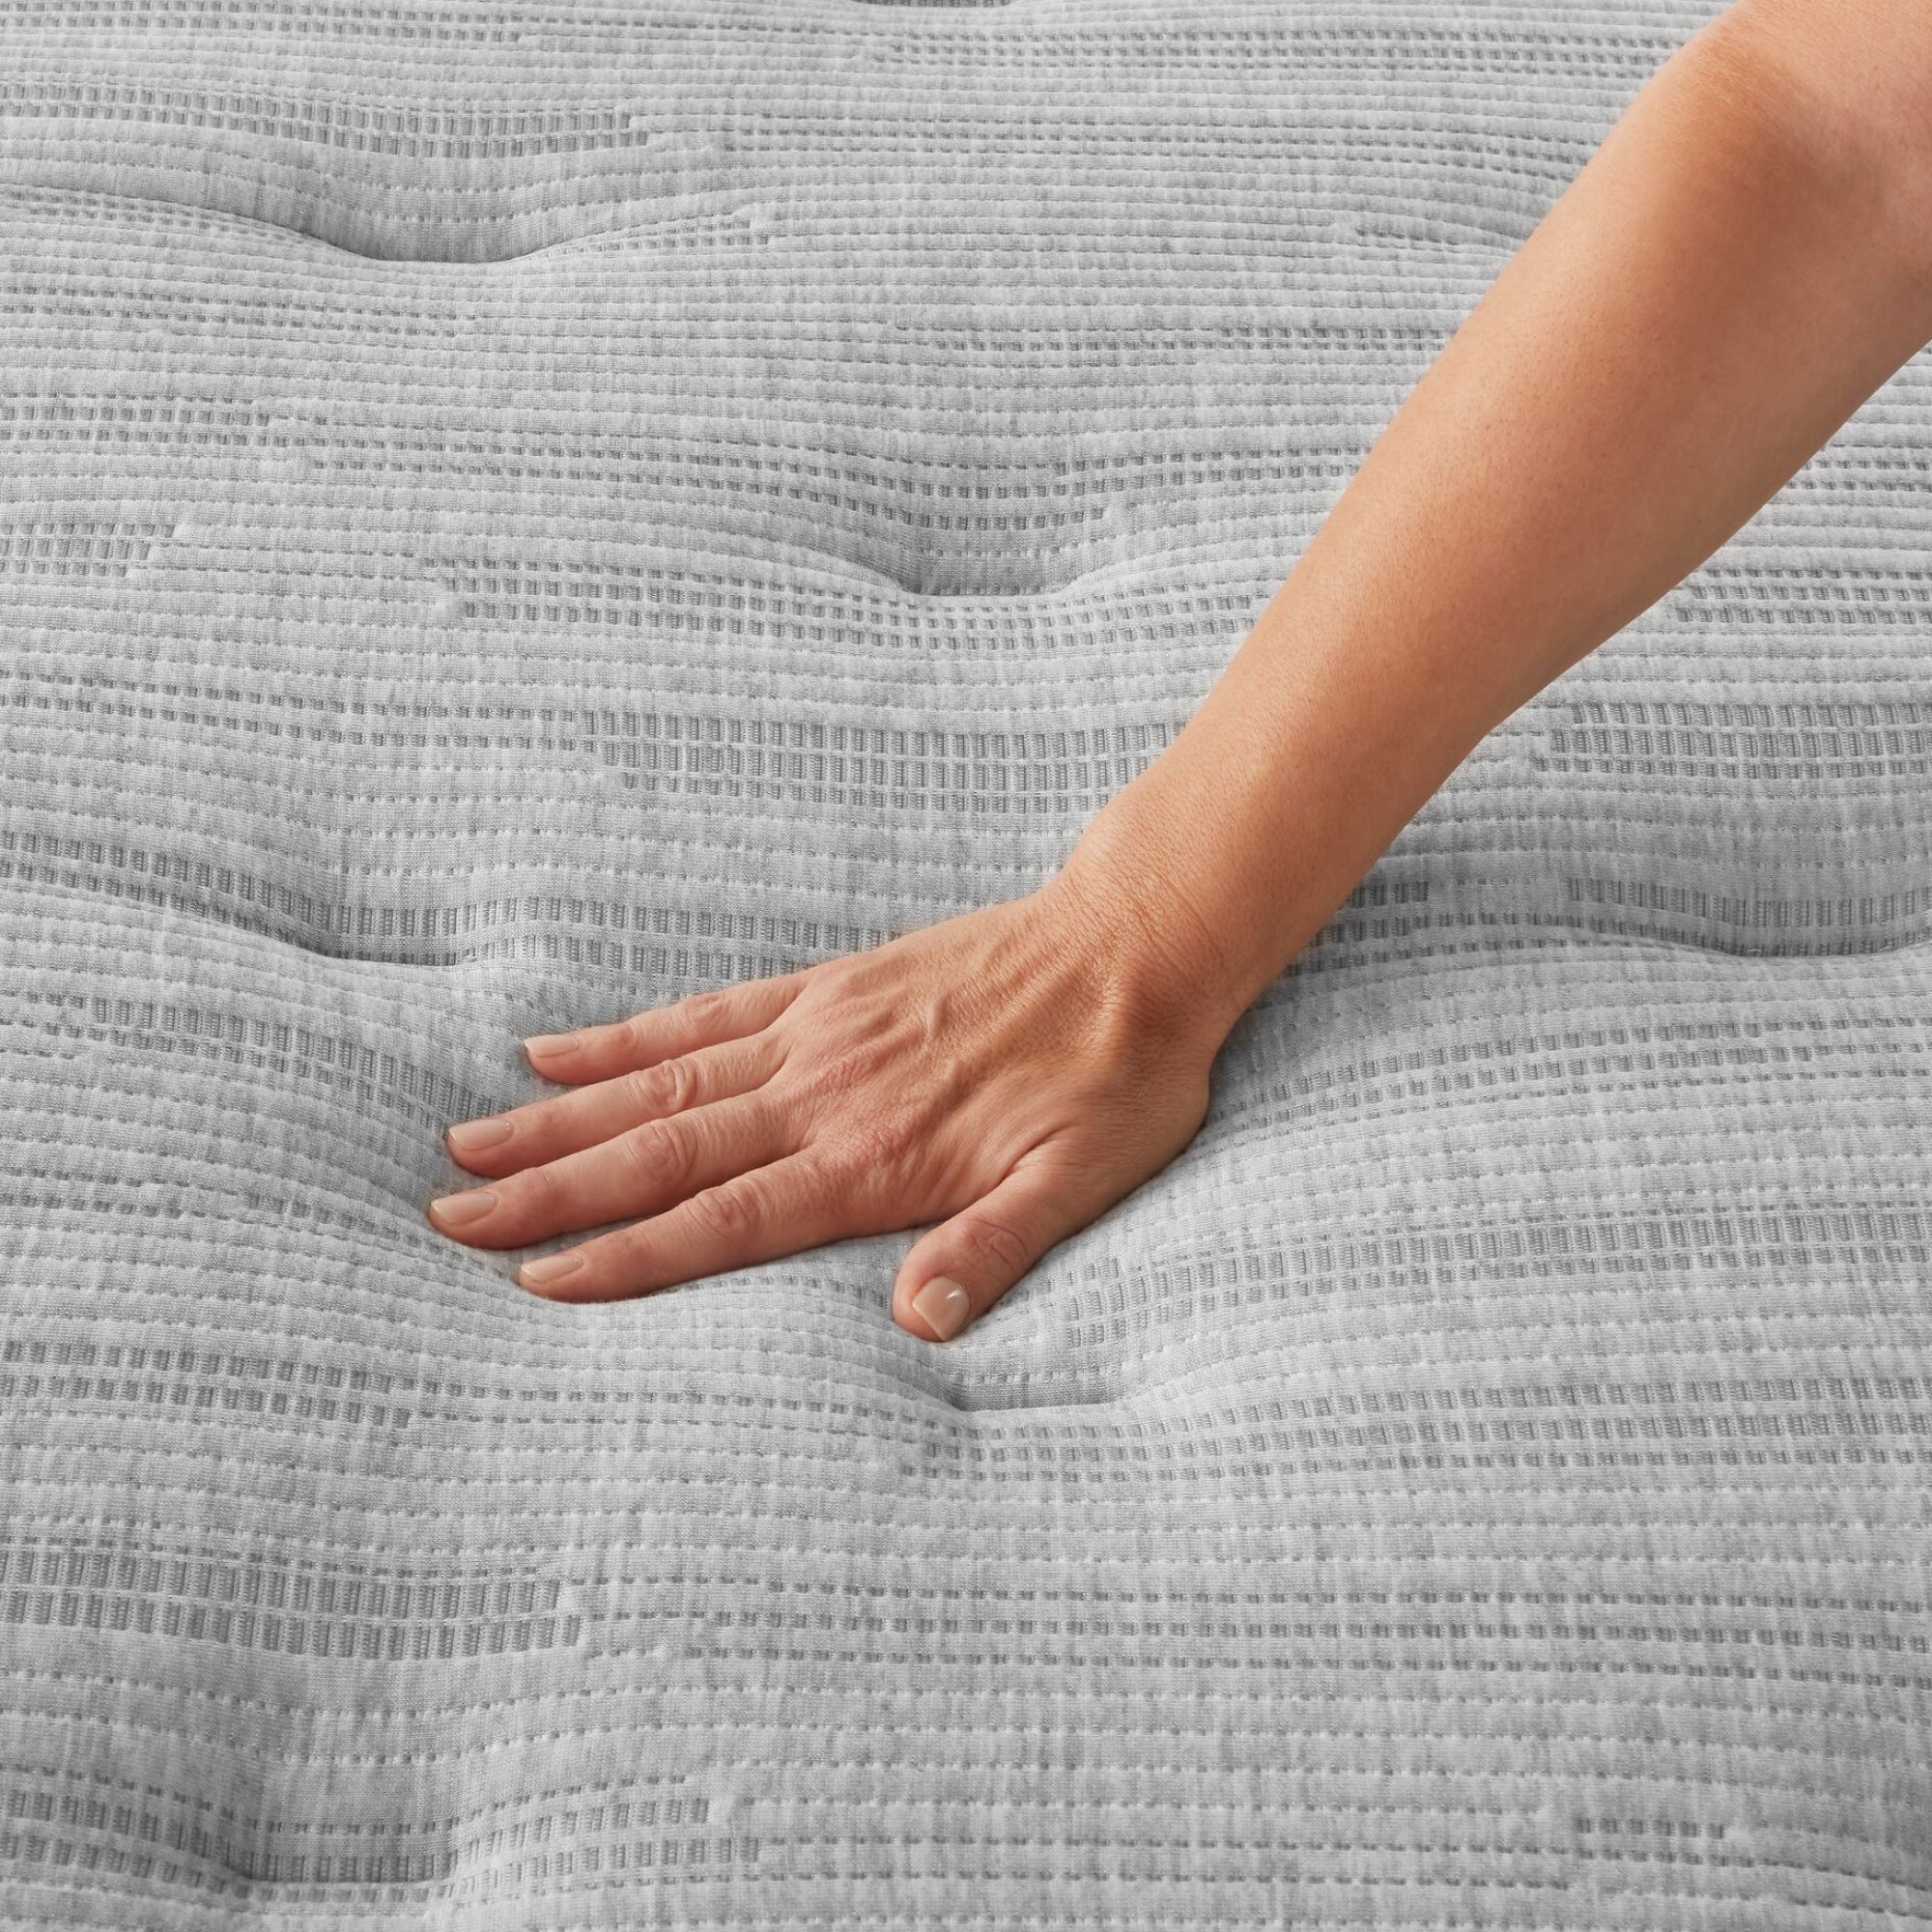 Hand pressing on the Beautyrest Select Mattress to show firmness level  ||feel: Medium